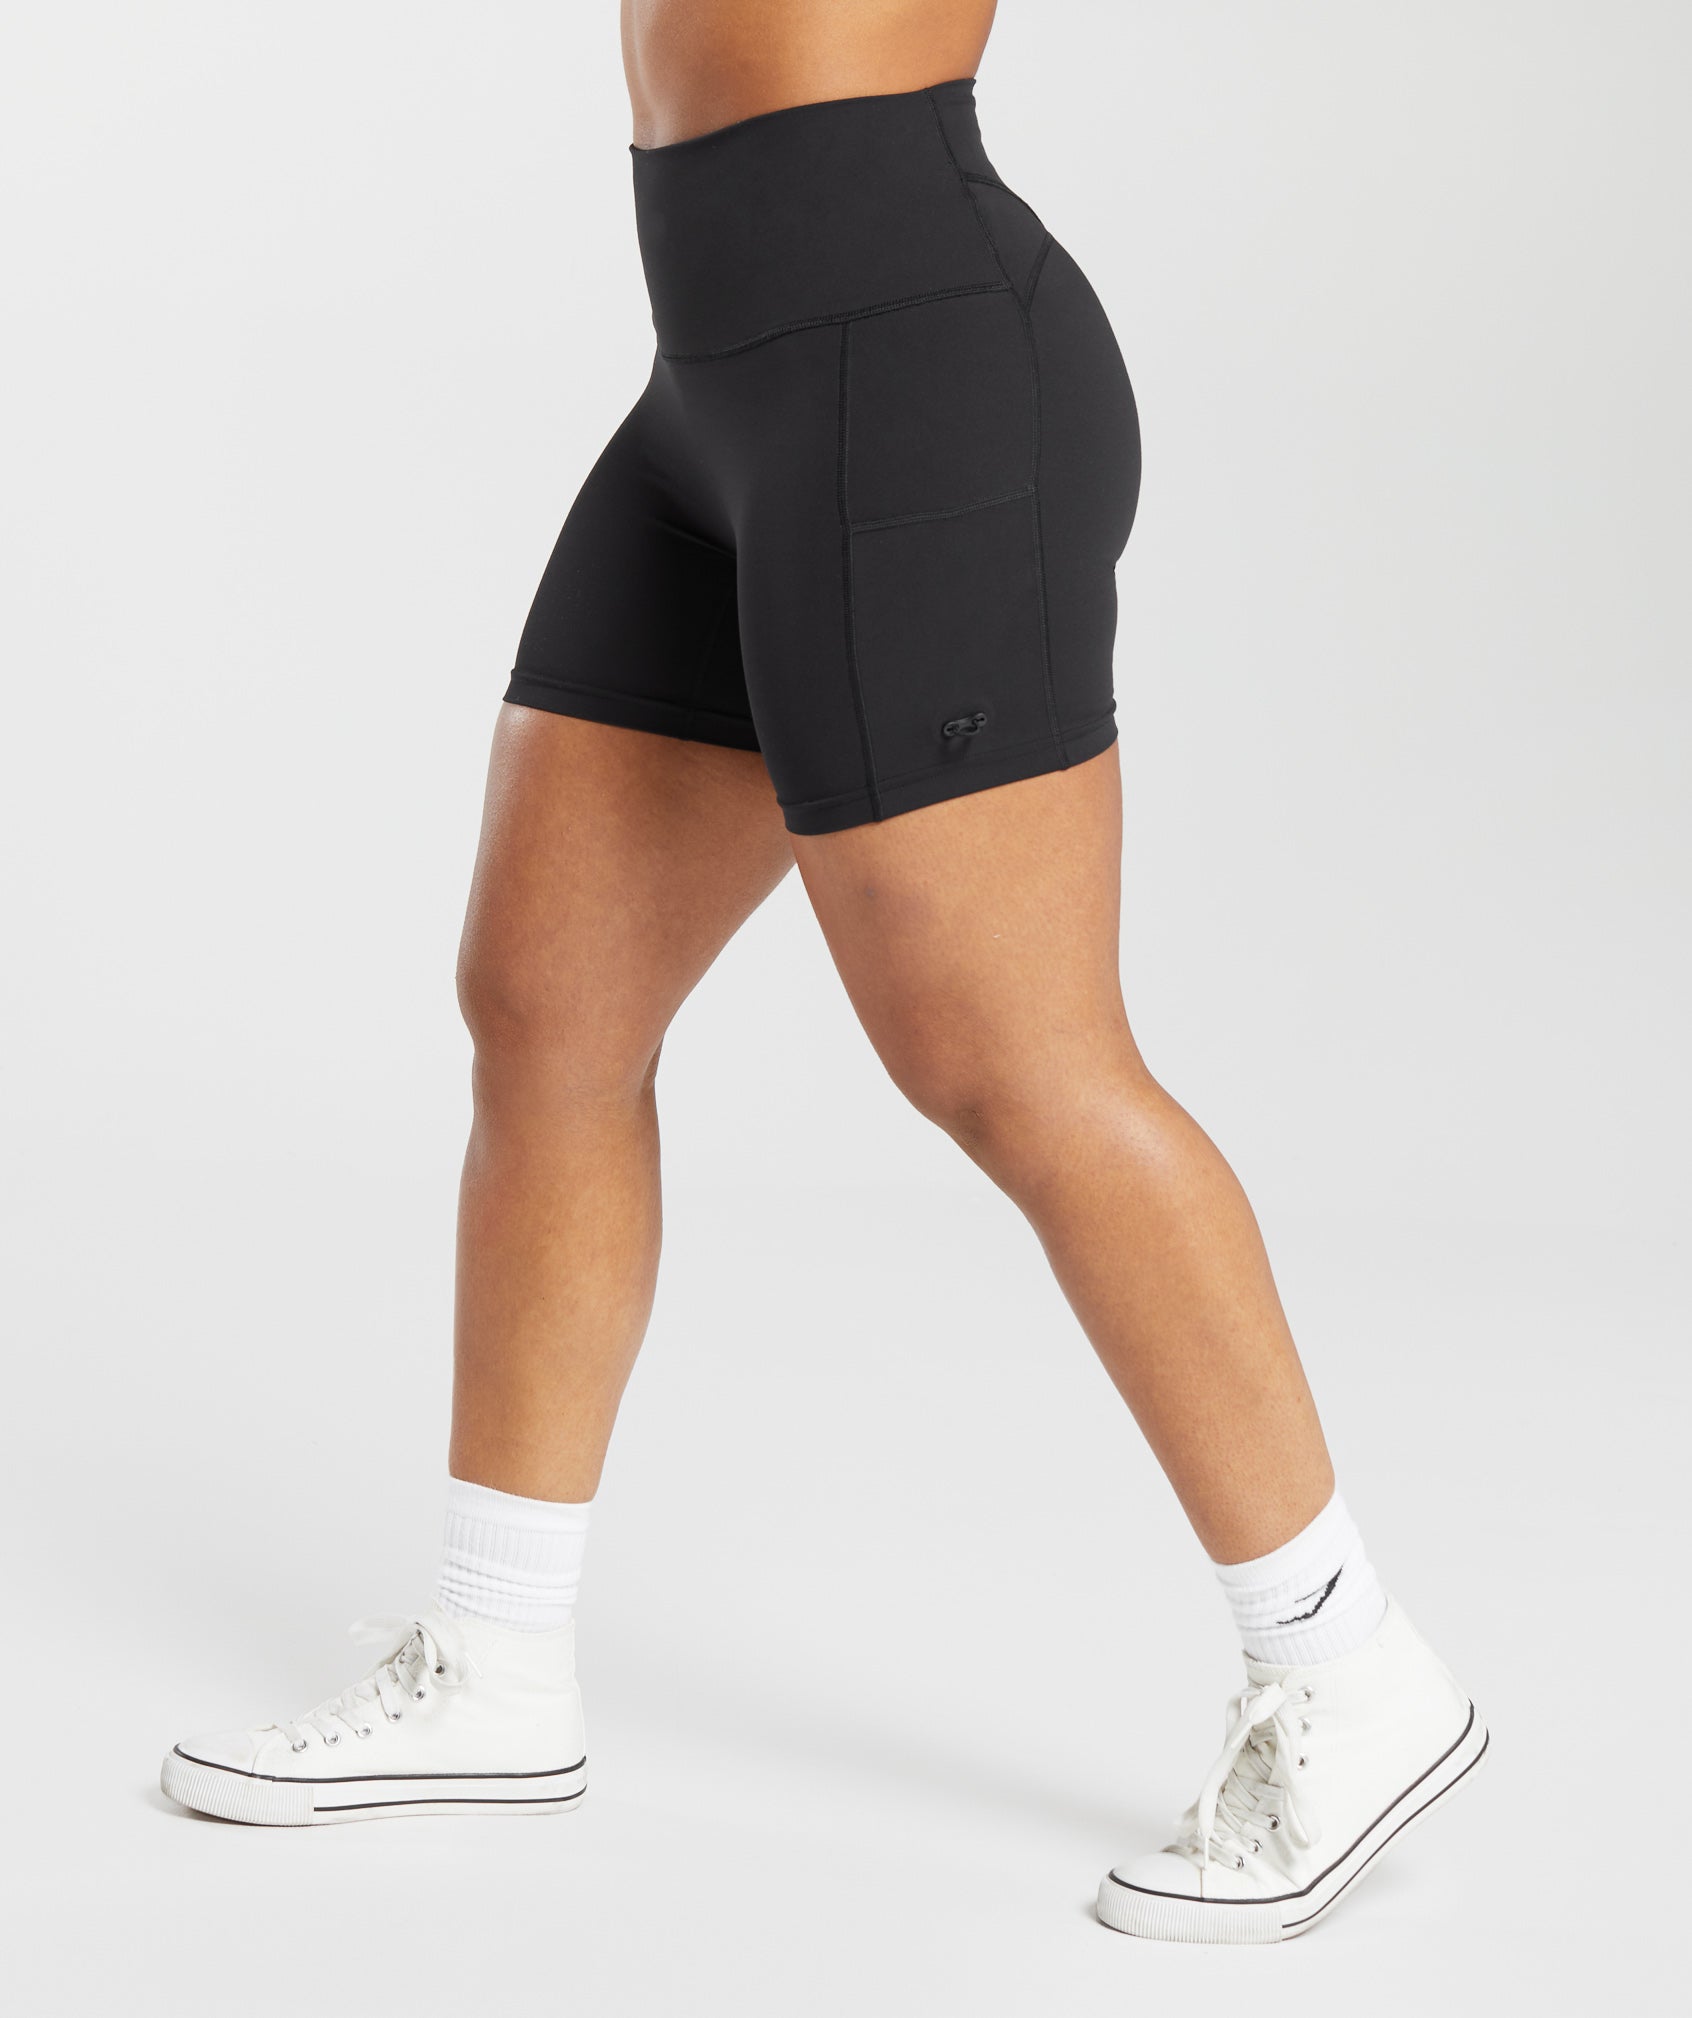 Legacy Tight Shorts in Black - view 3